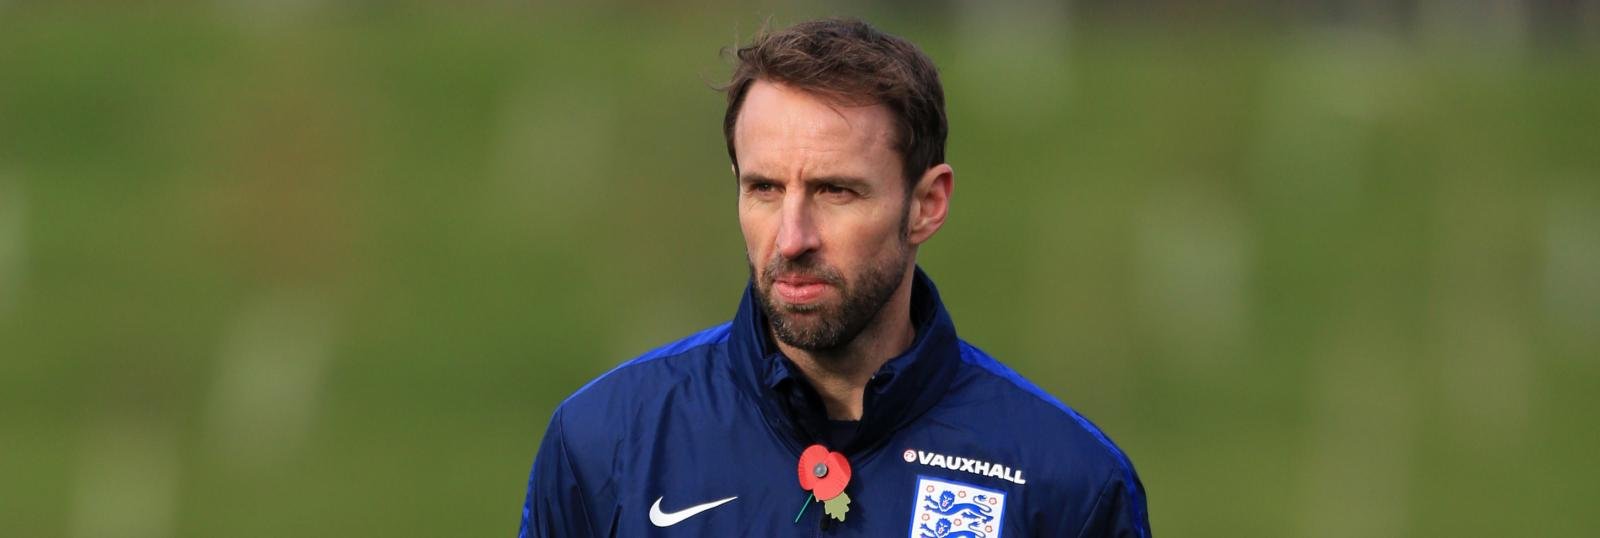 3 England players Southgate should start against Spain